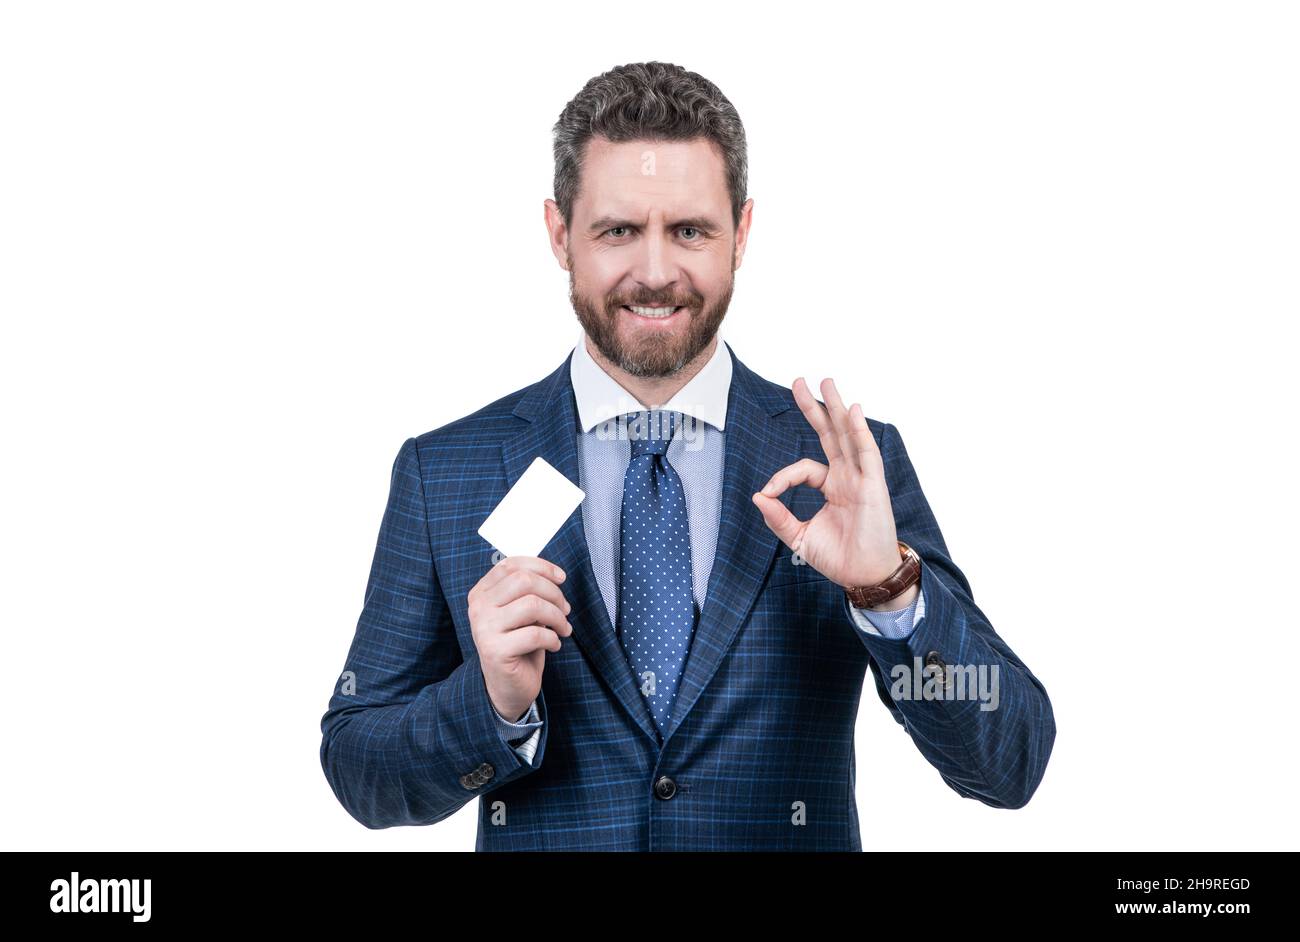 empty plastic business name card. successful ceo suggest easy banking profit payment. Stock Photo